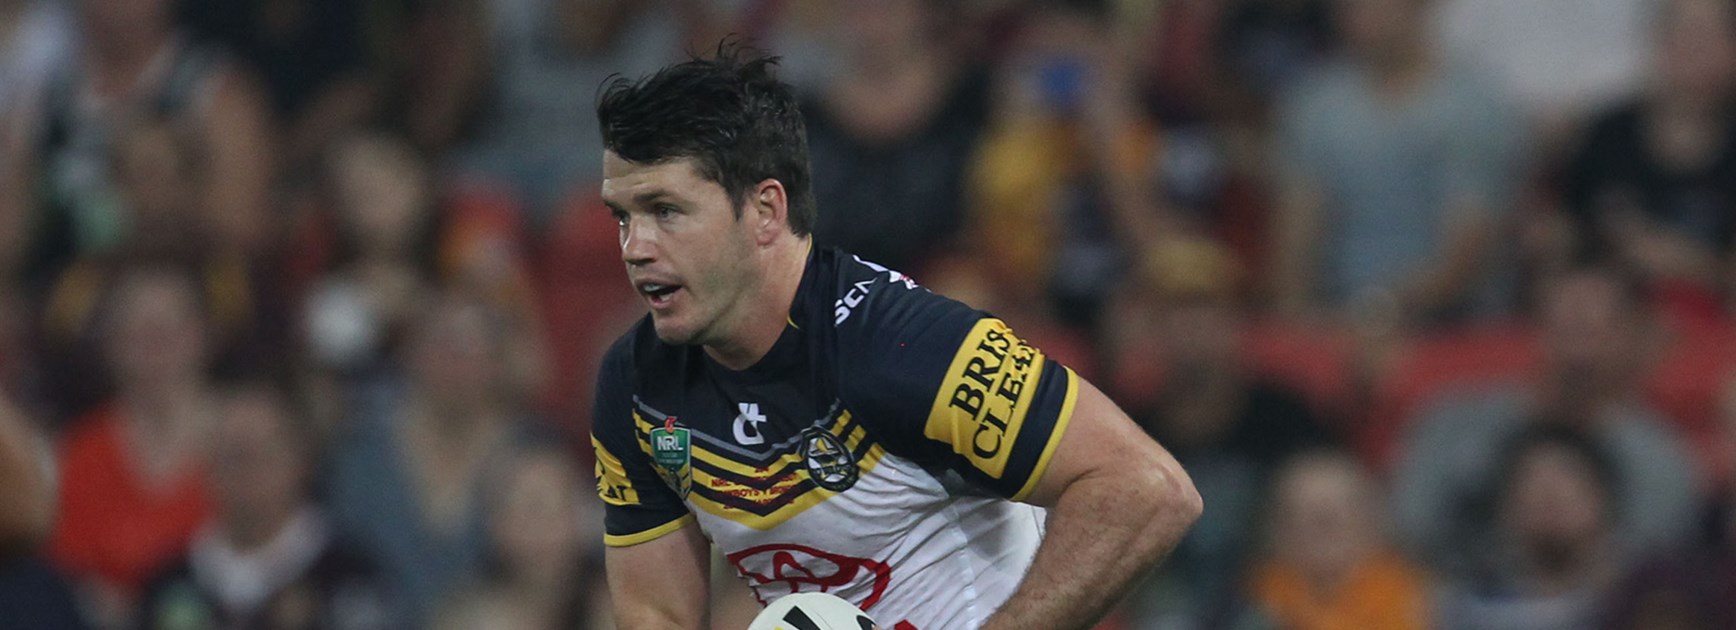 Lachlan Coote has been an unsung hero for the Cowboys at fullback.